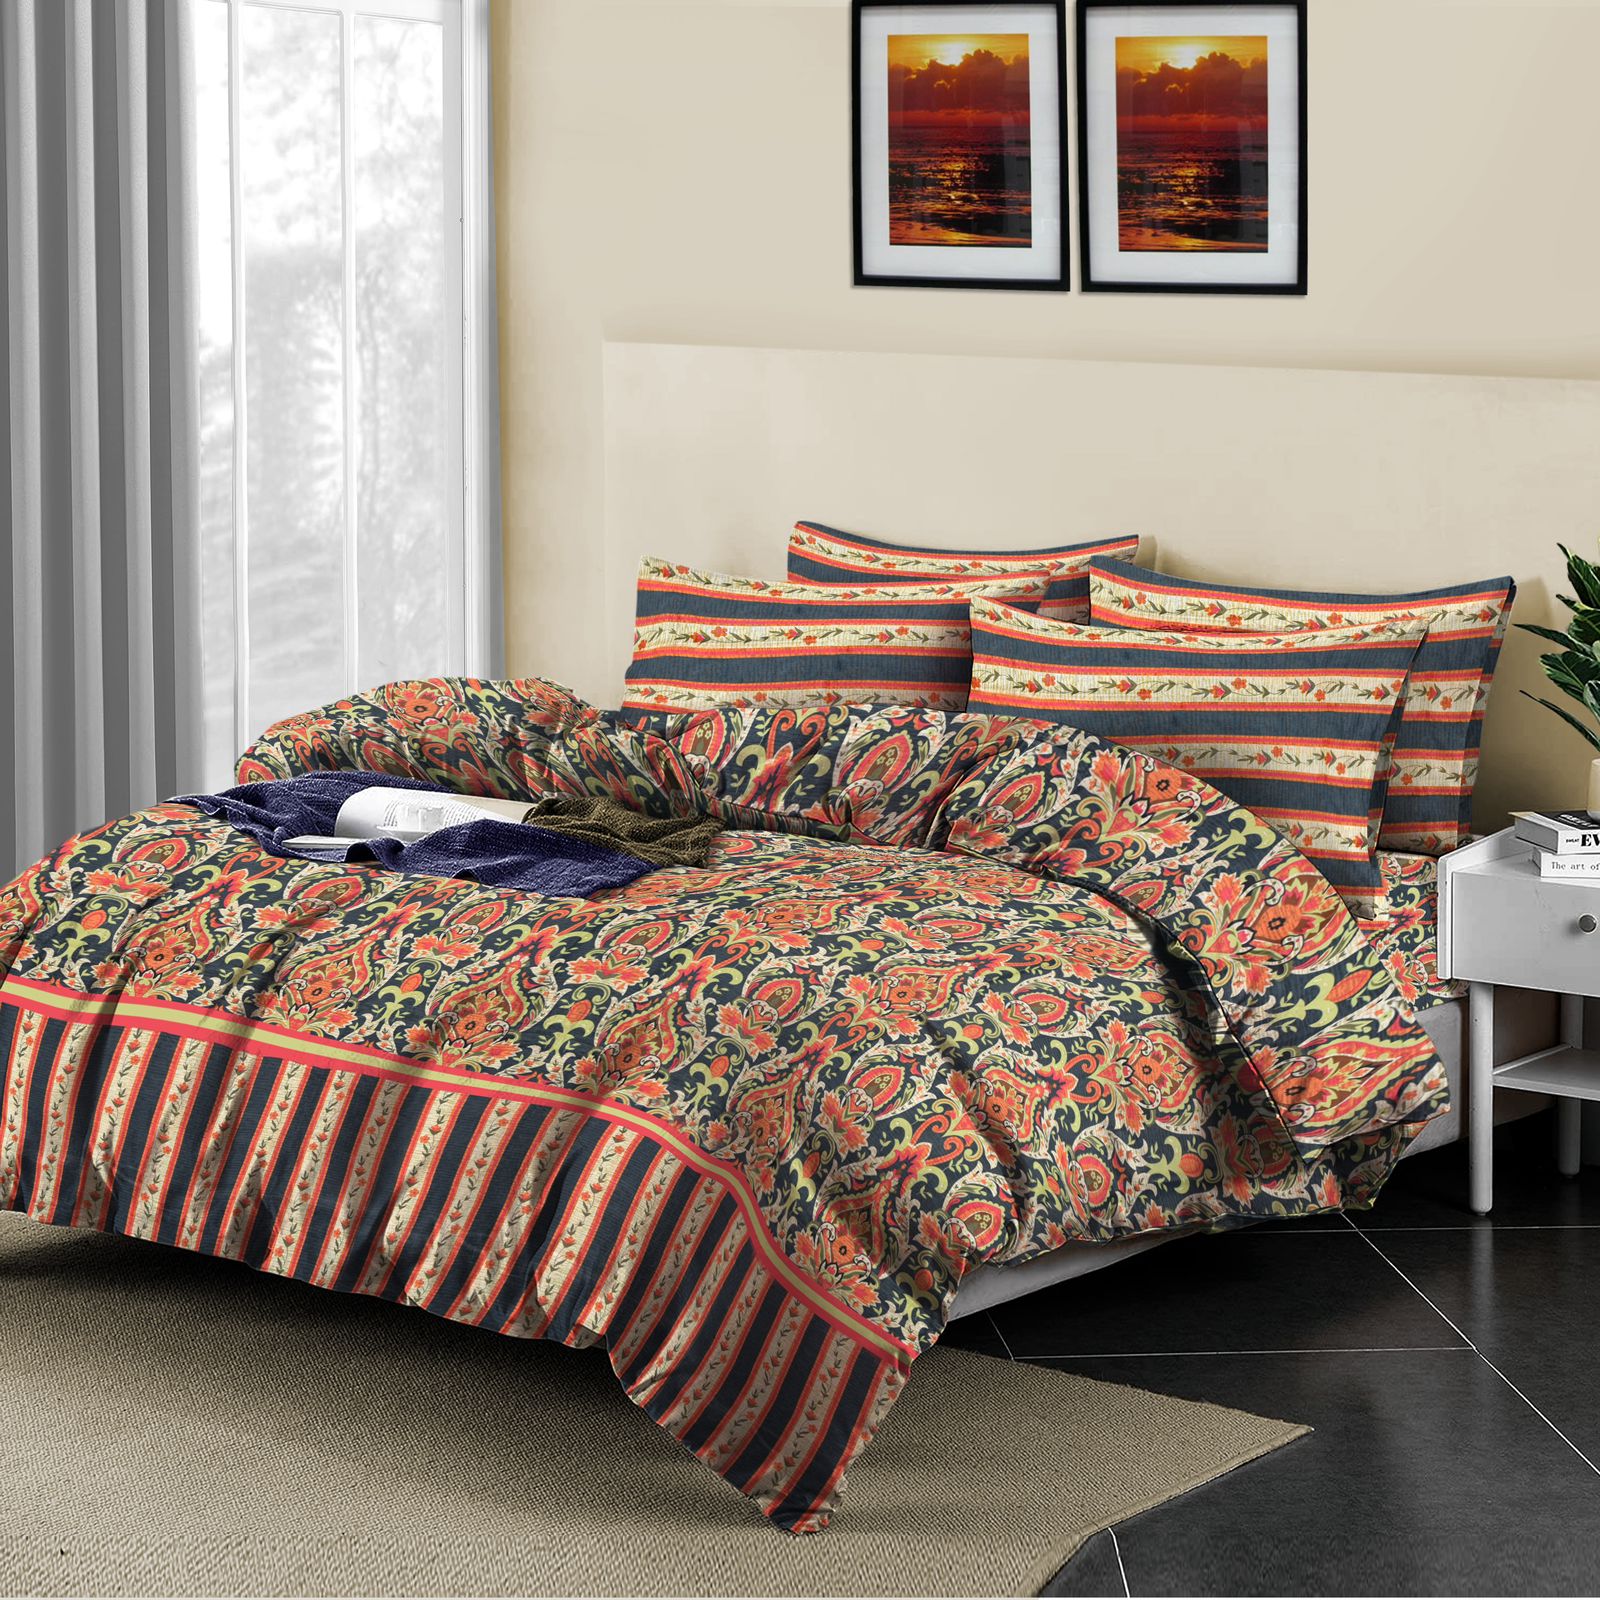 Grace D939- 6 pc summer Comforter Set with 4 pillow covers